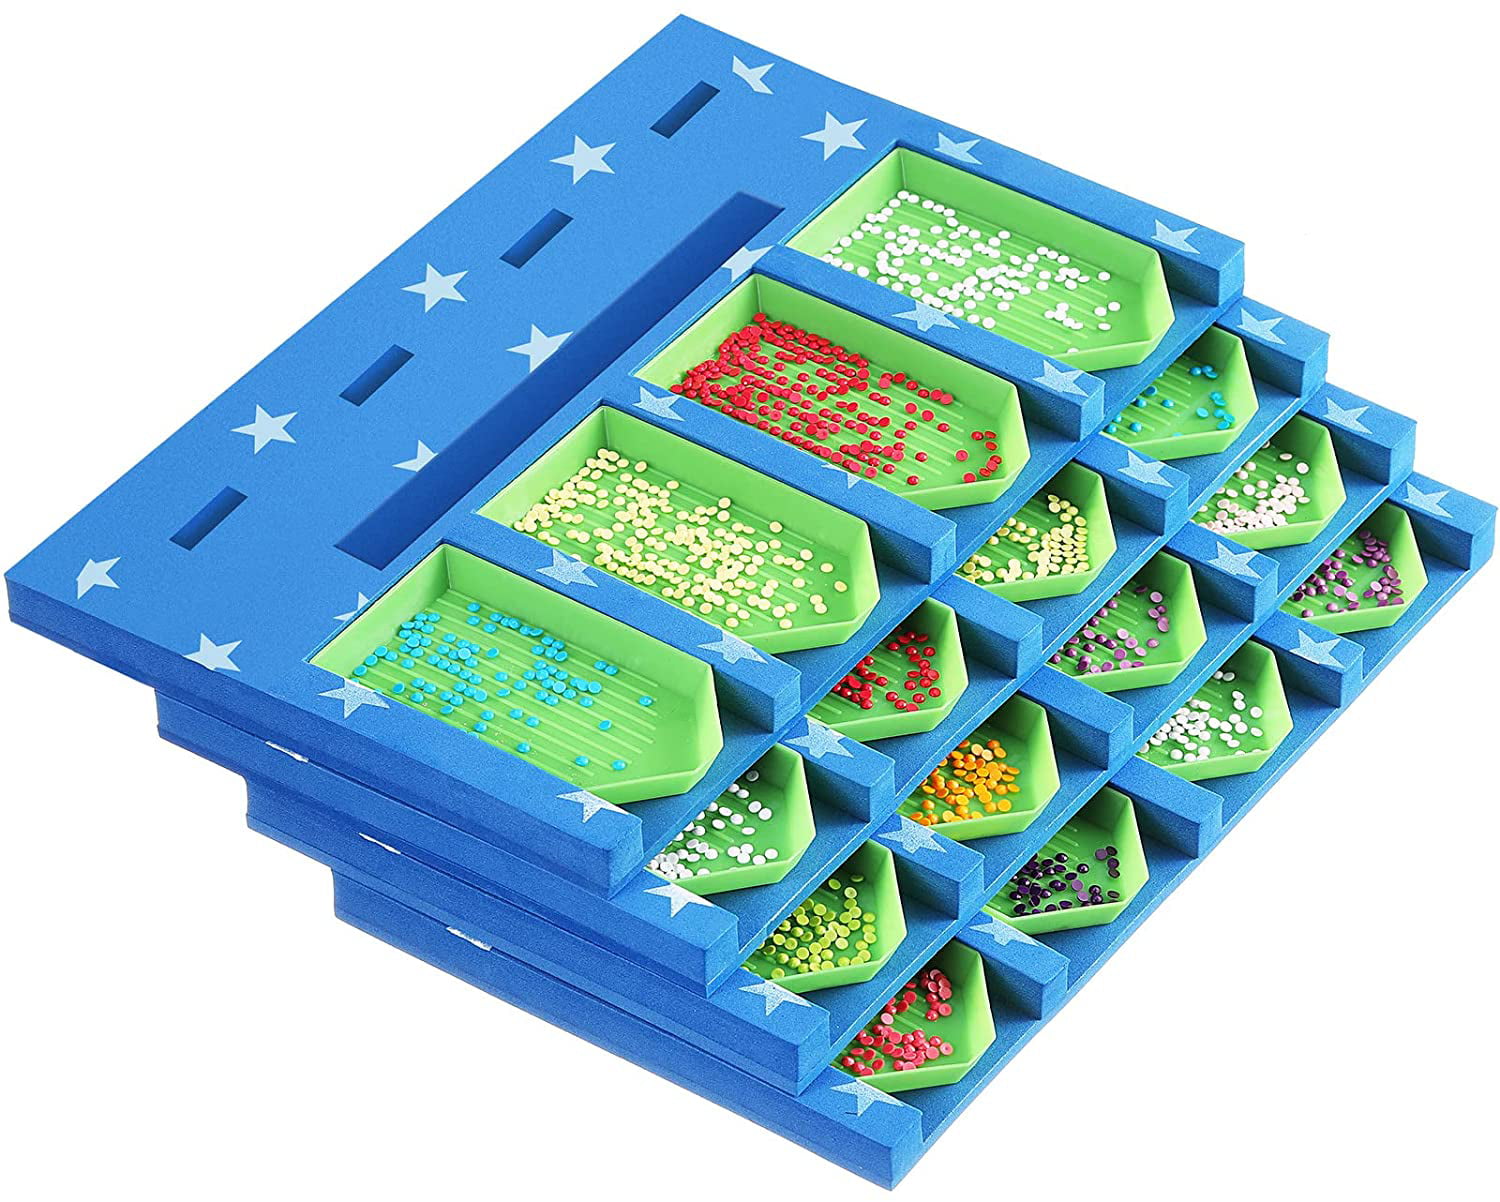 4 Pieces Diamond Paining Trays Storage Painting Drill Tray Organizer Diamond Painting Tool Accessories Multi-Boat Holder for Adults DIY Painting Crafts Blue 